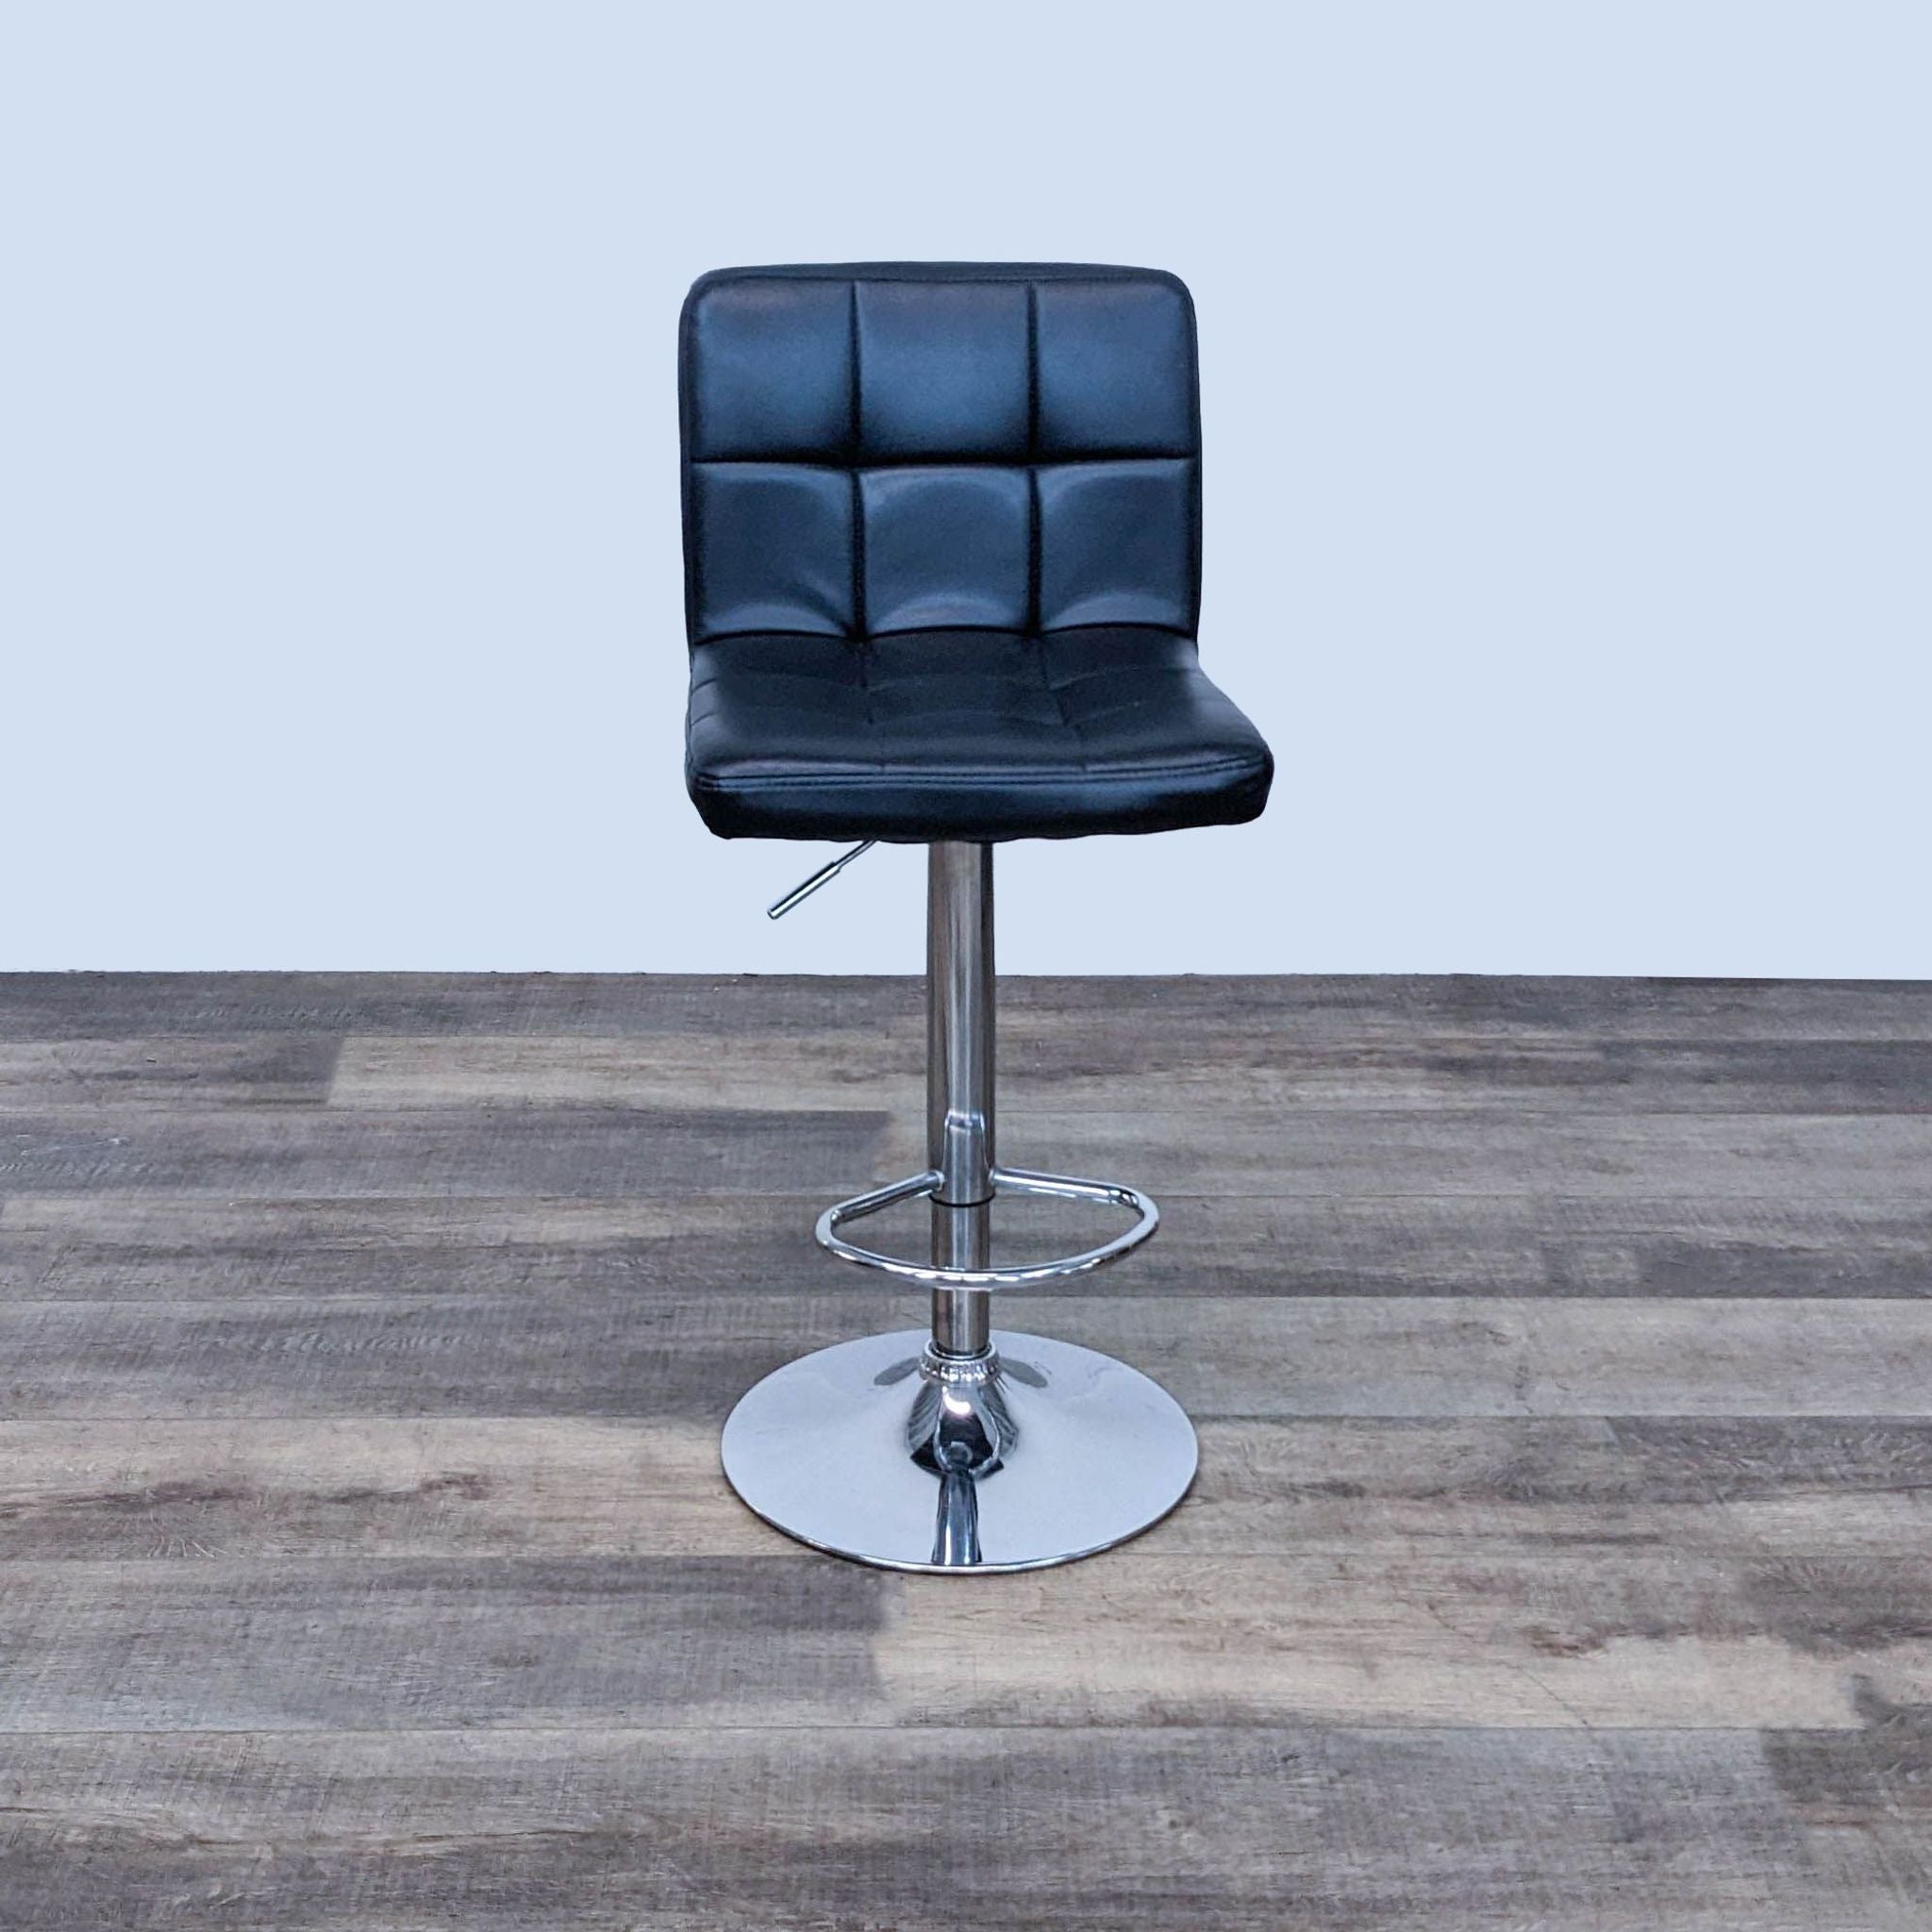 Reperch padded black leather-look stool with square seat and chrome gas lift frame, on wooden floor.